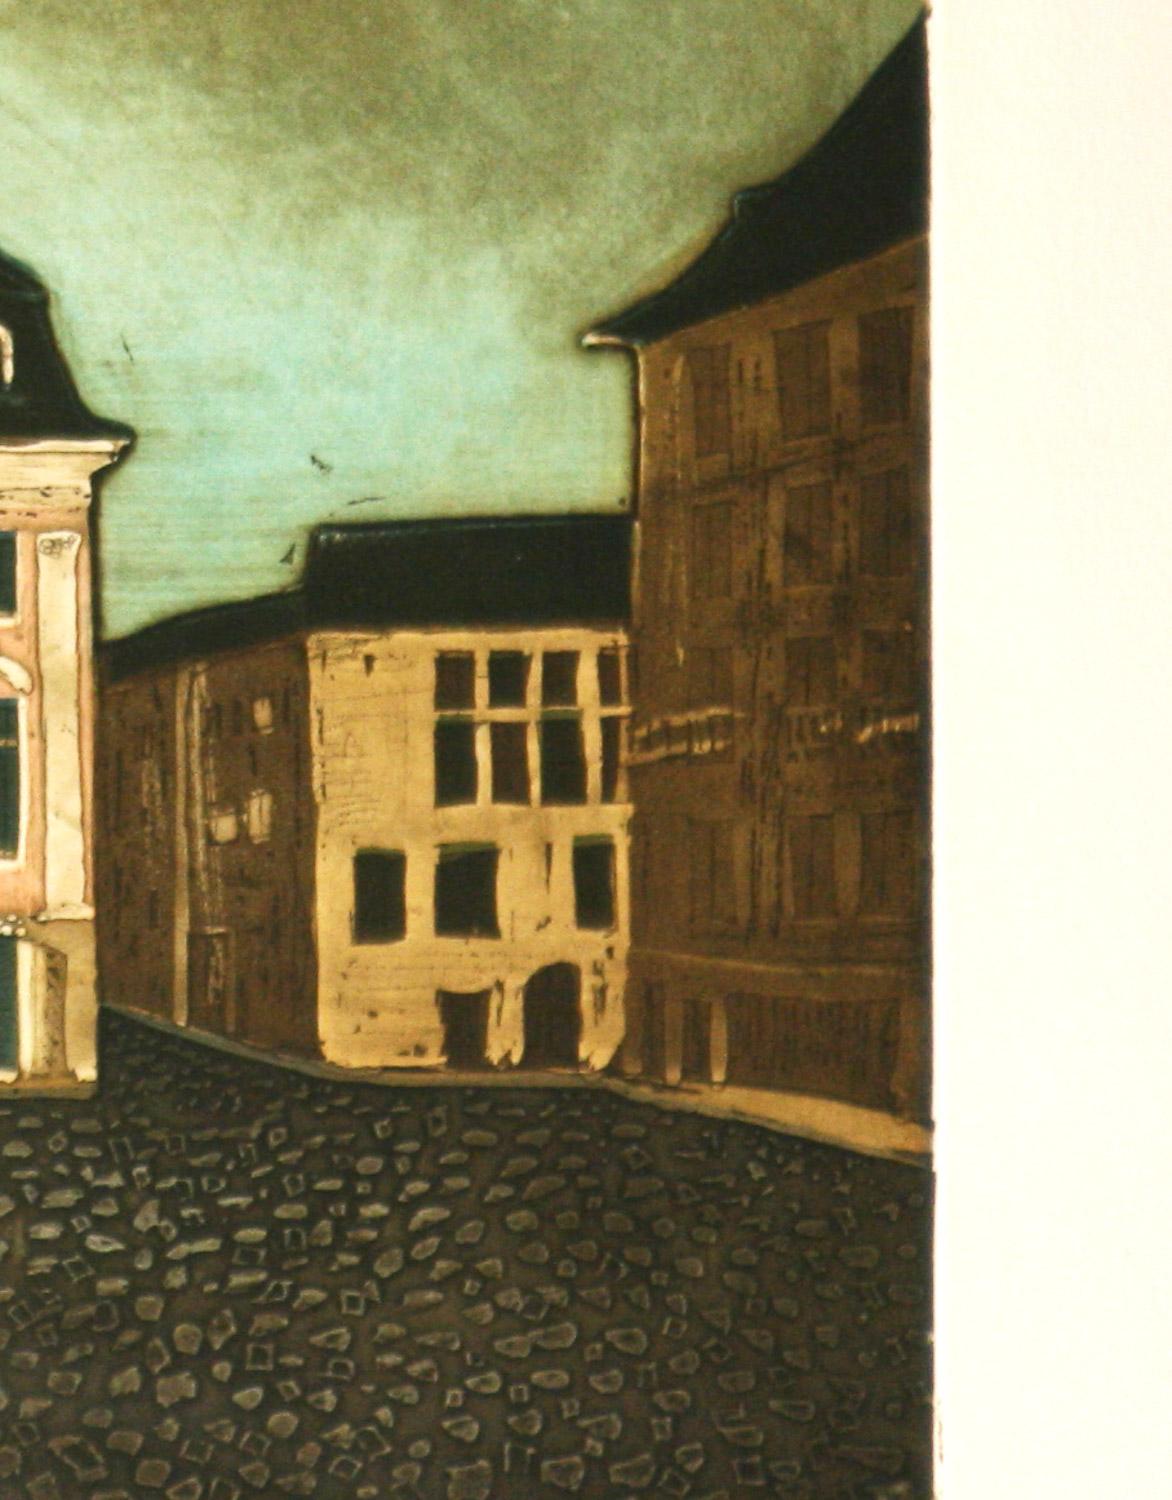   Bonn, Germany is an original signed, limited edition aquatint etching by French artist J.J. Regal. Printed on BFK Rives paper this is a very bold design with an original depiction of a major European city. Numbered 90/100 and signed in pencil by